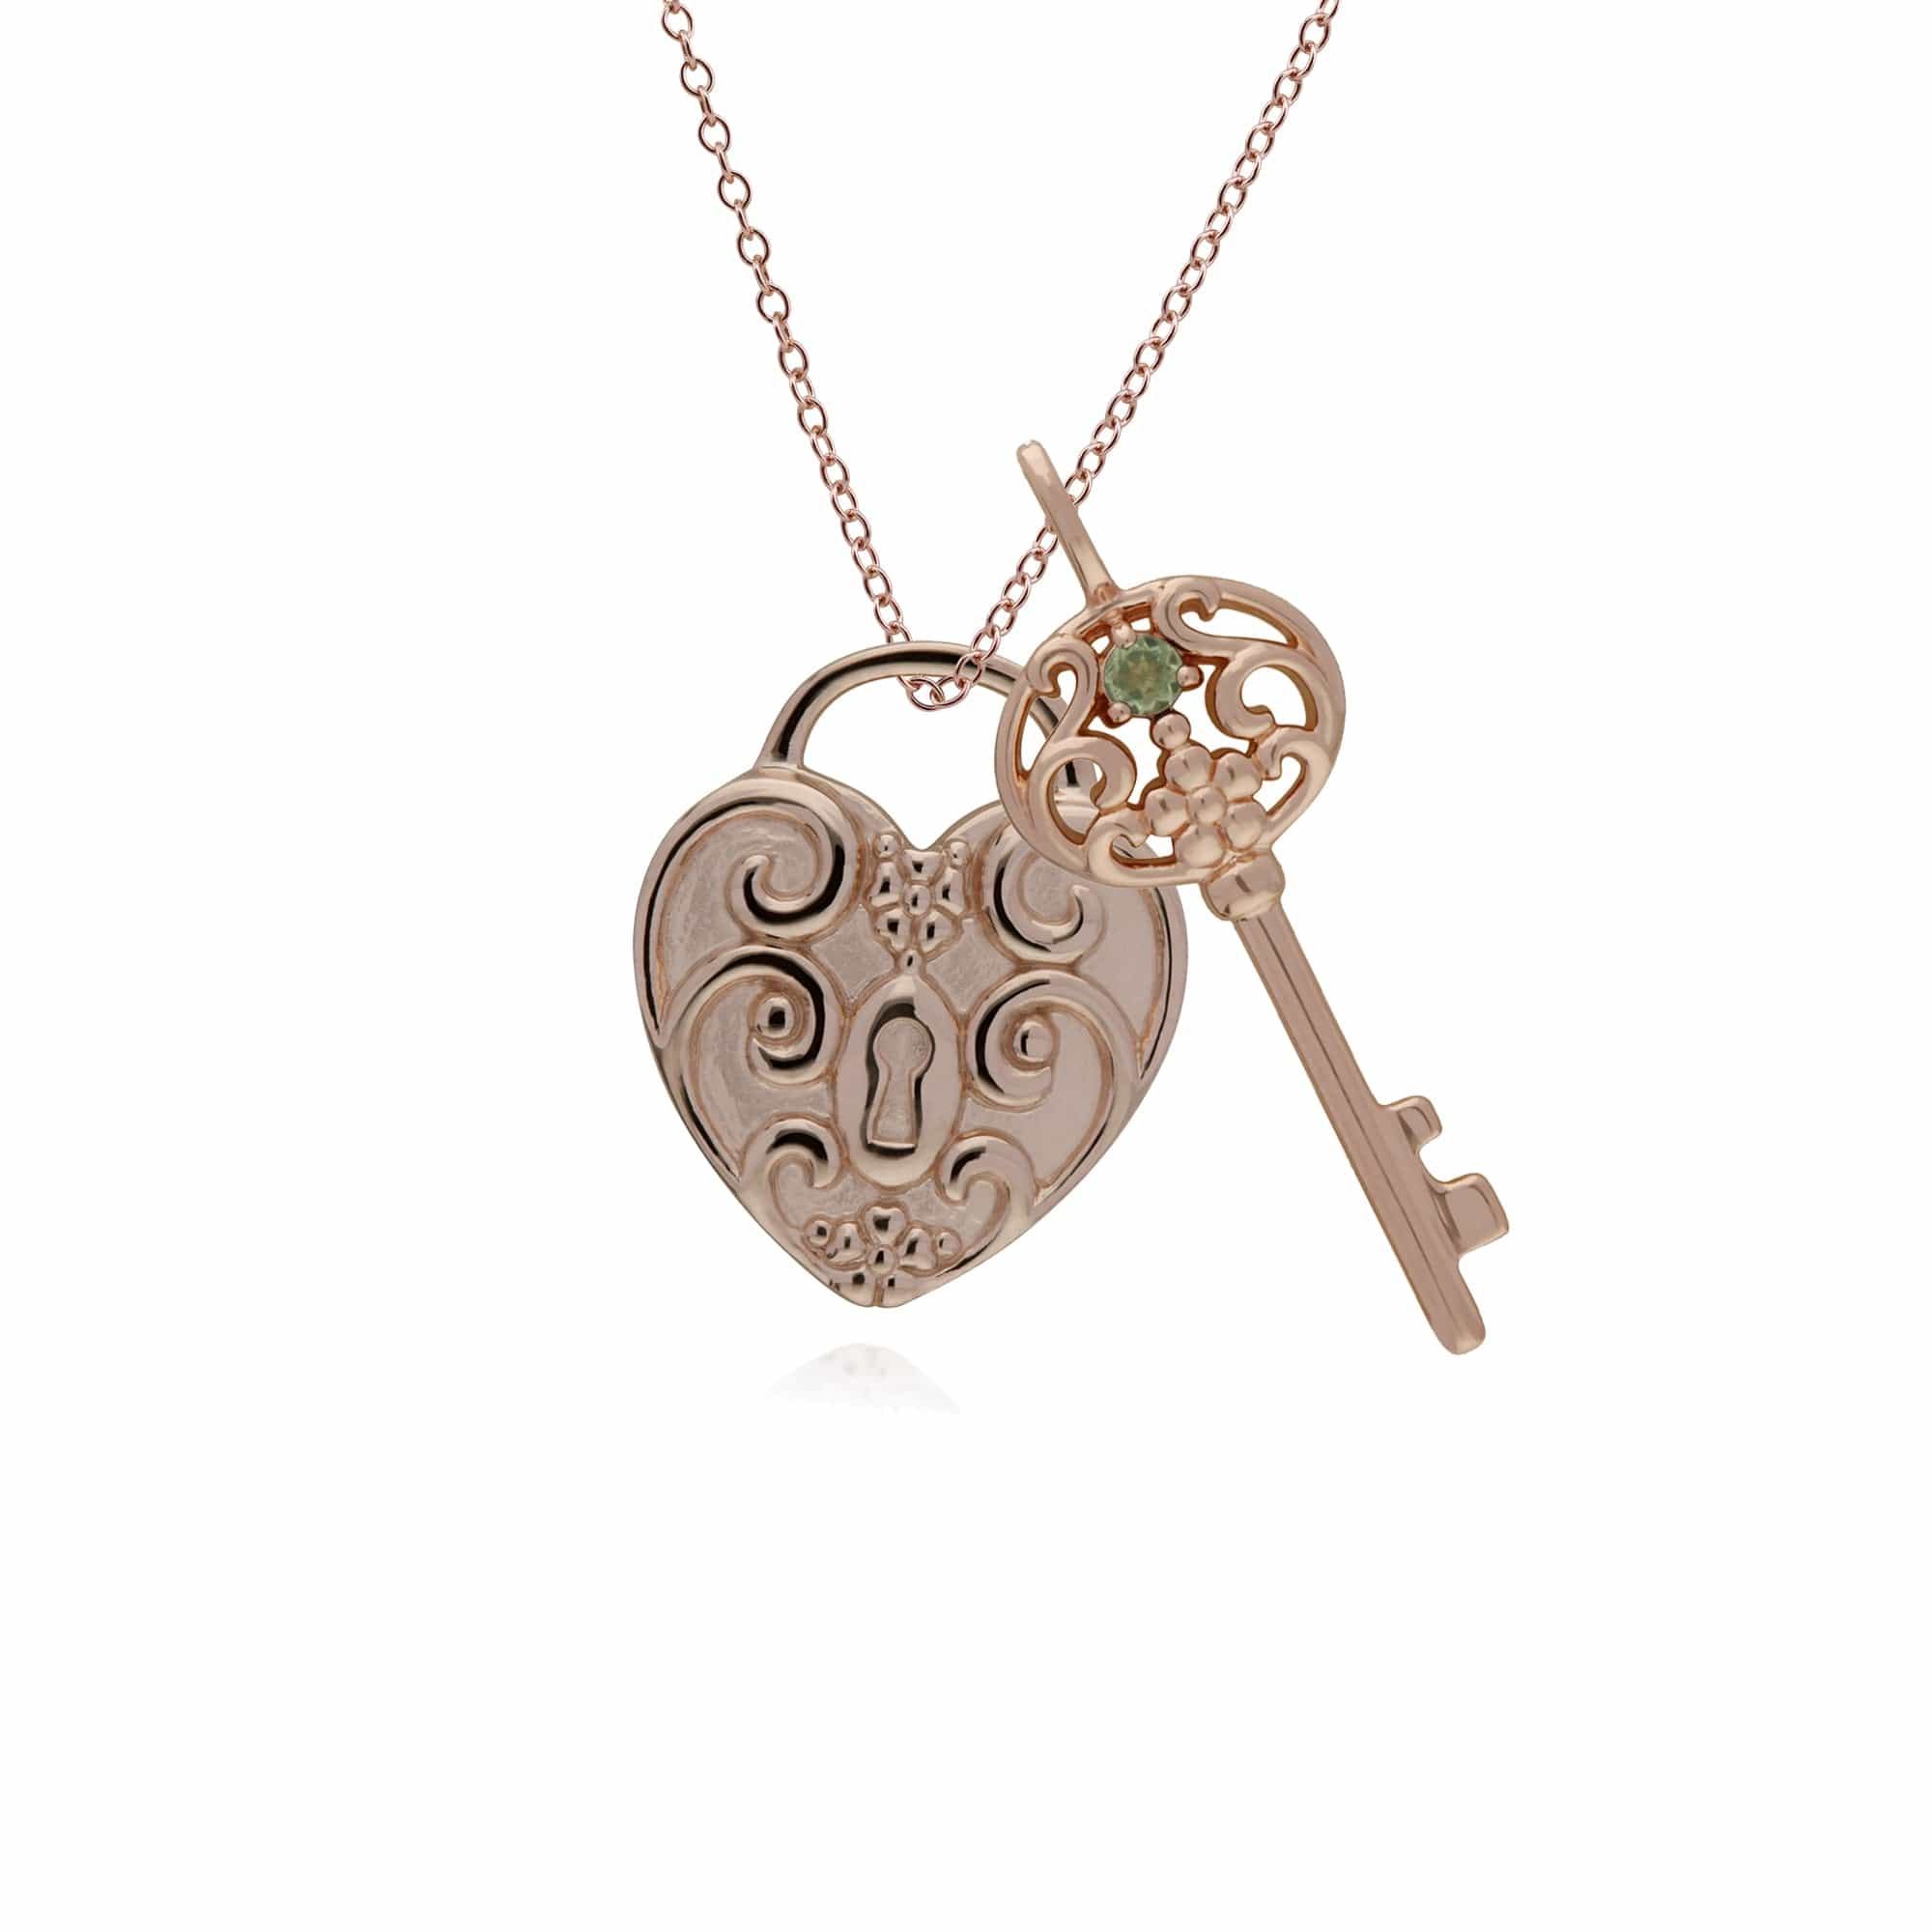 270P026708925-270P026501925 Classic Swirl Heart Lock Pendant & Peridot Big Key Charm in Rose Gold Plated 925 Sterling Silver 1